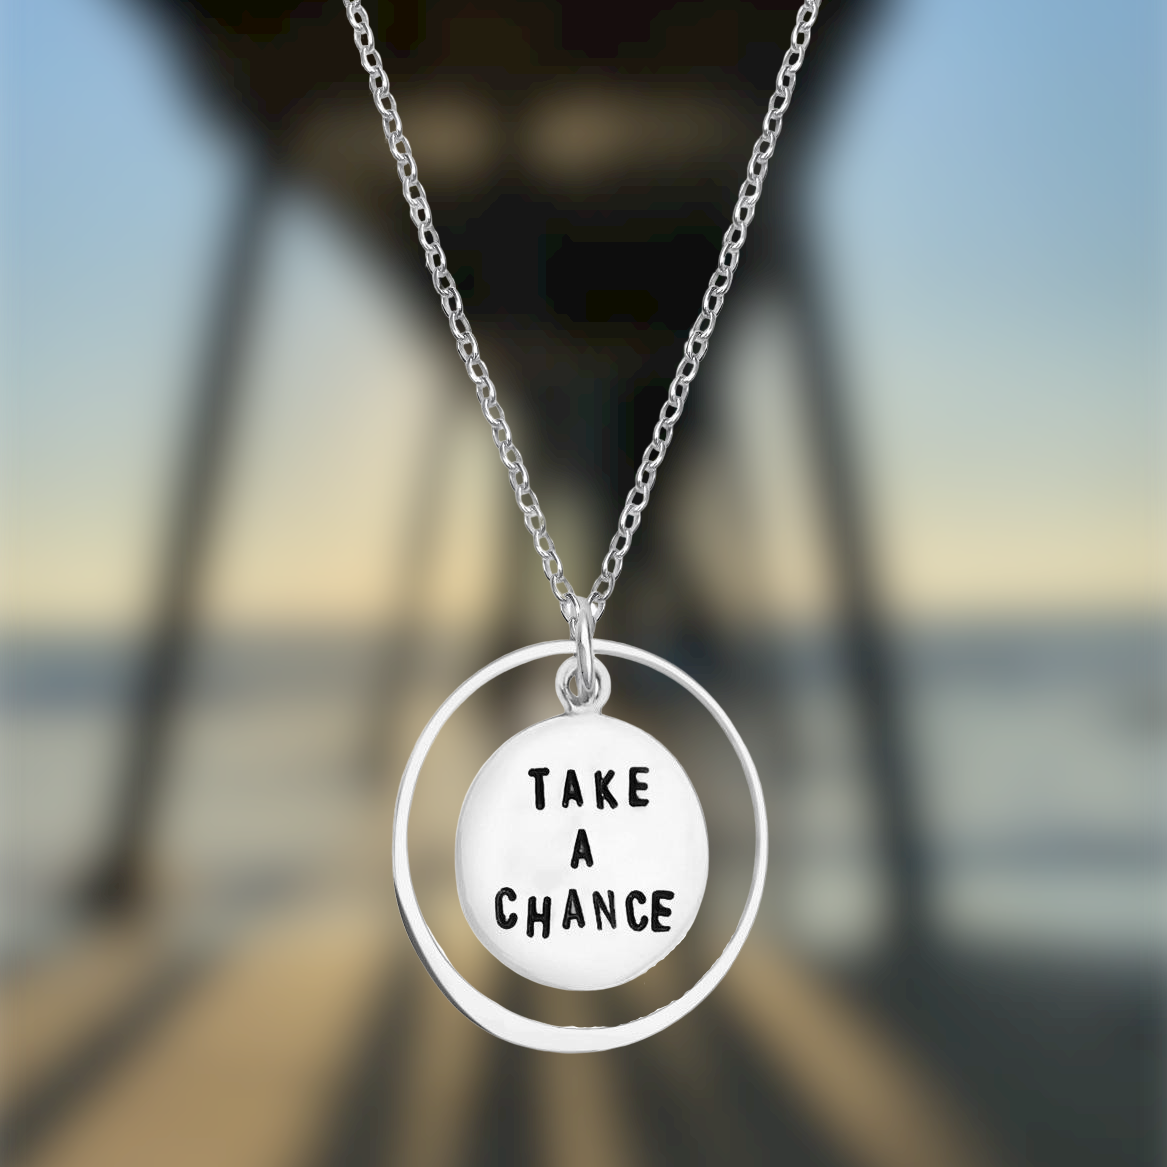 Inspirational Sterling Silver Take a Chance Necklace